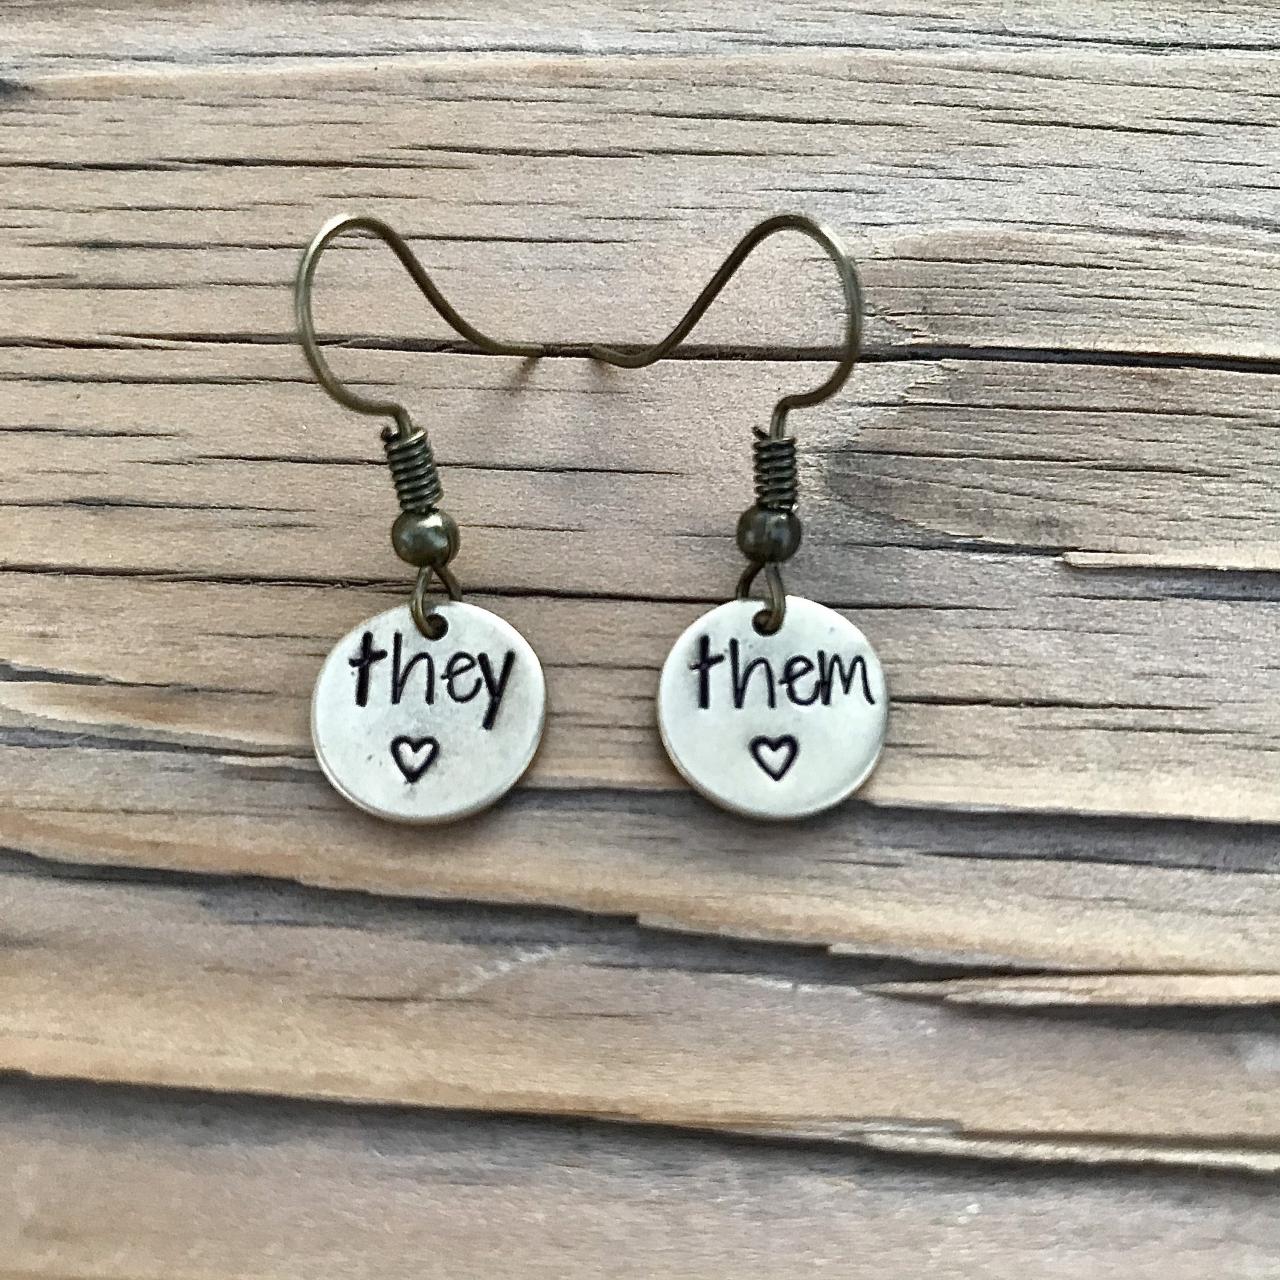 They Them Jewelry, Golden brass, Tiny word earrings, hand stamped metal, metal stamped earrings,